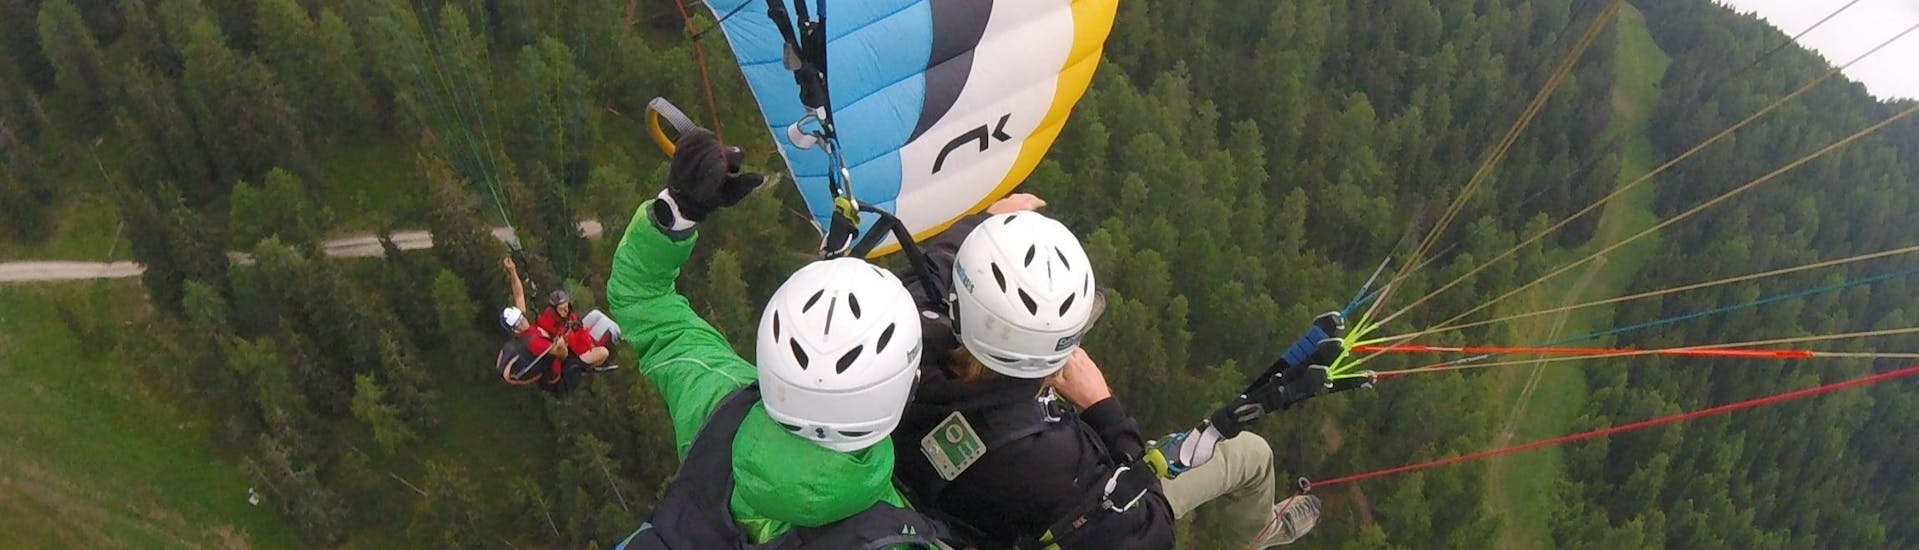 During the Tandem Paragliding in Falzes near Brunico with Tandemflights Kronplatz, a young woman and her tandem pilot are enjoying the spectacular view.